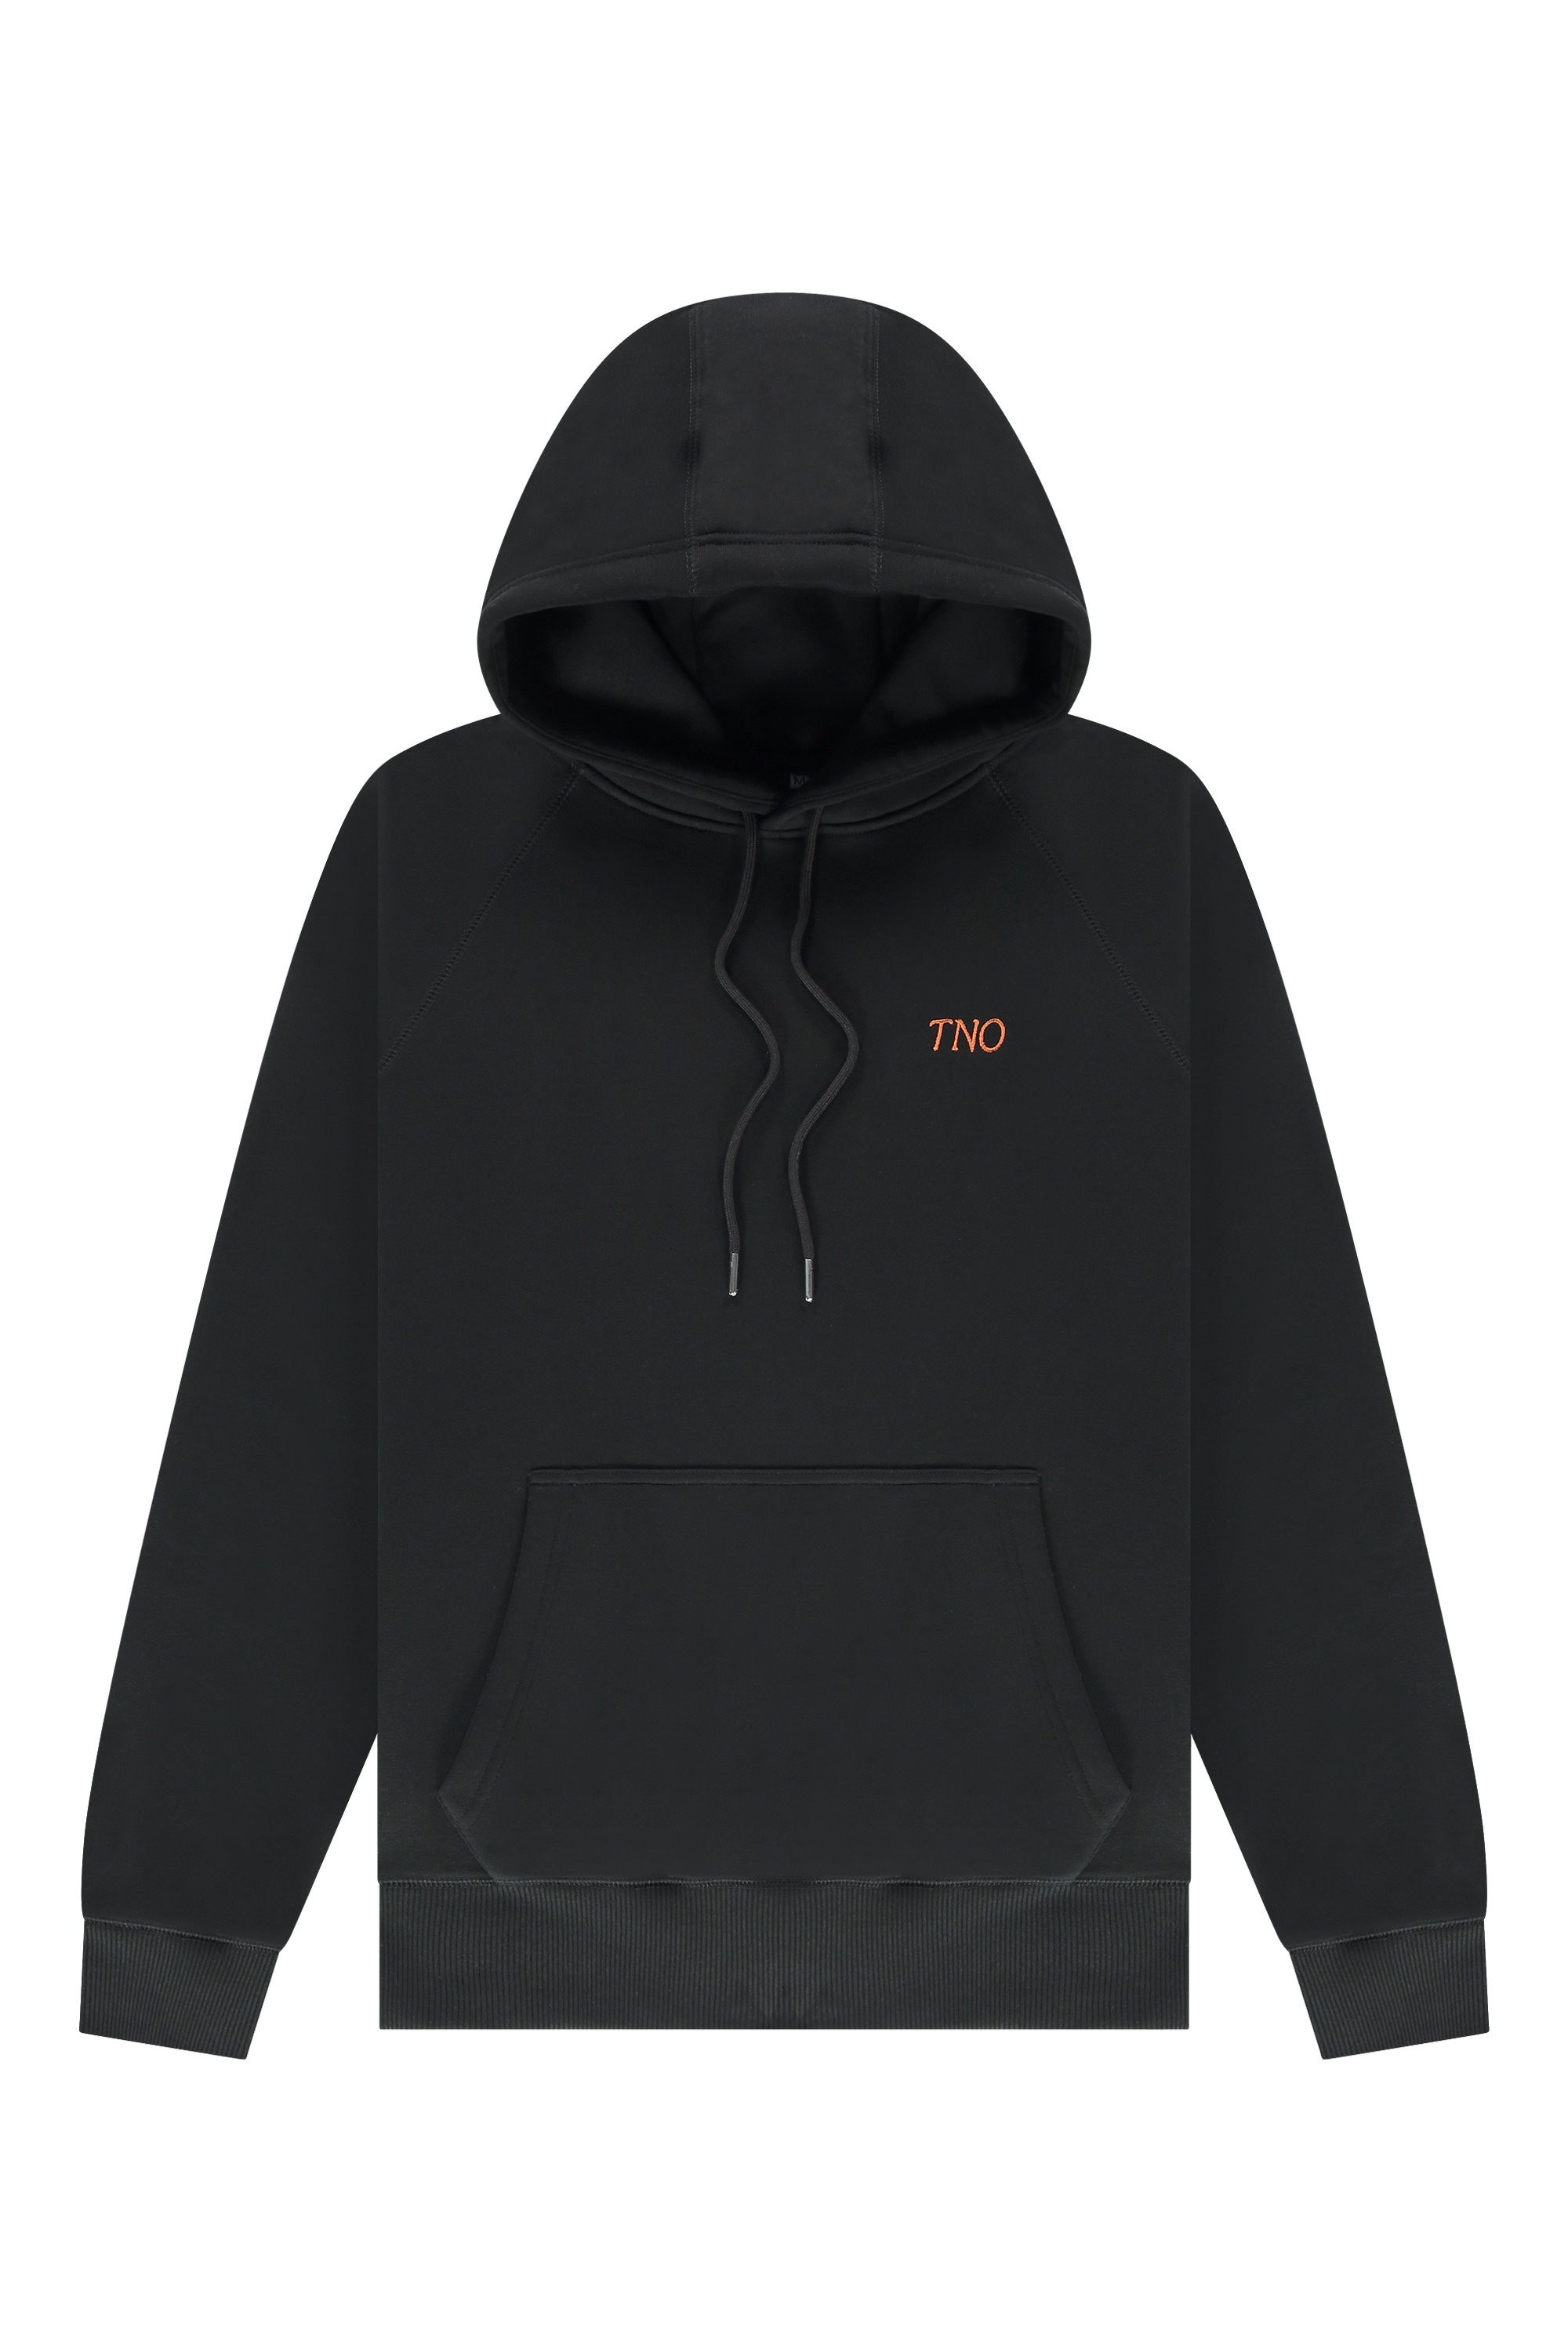 files-catnahoodie_black_front-png